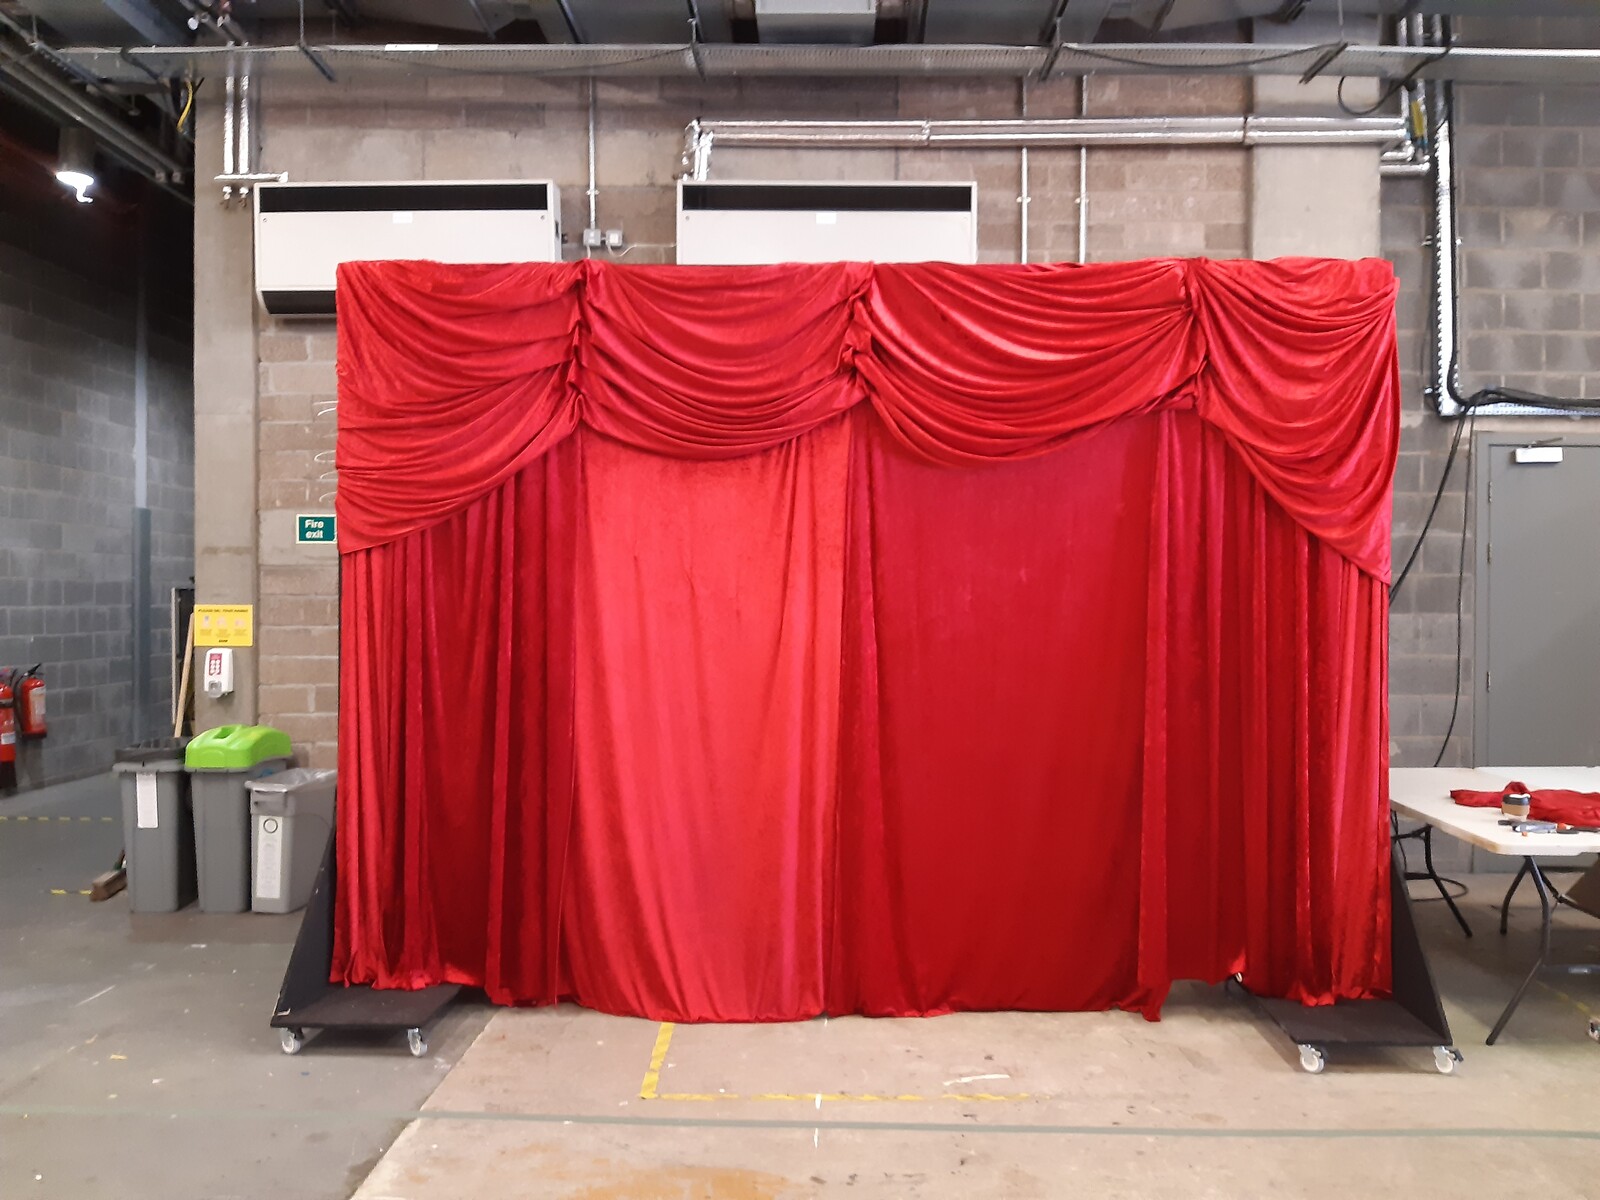 Saturday Mash-Up Live! CBBC
‘Act it Out’ theatre curtains.
Velour, curtain pulley system.